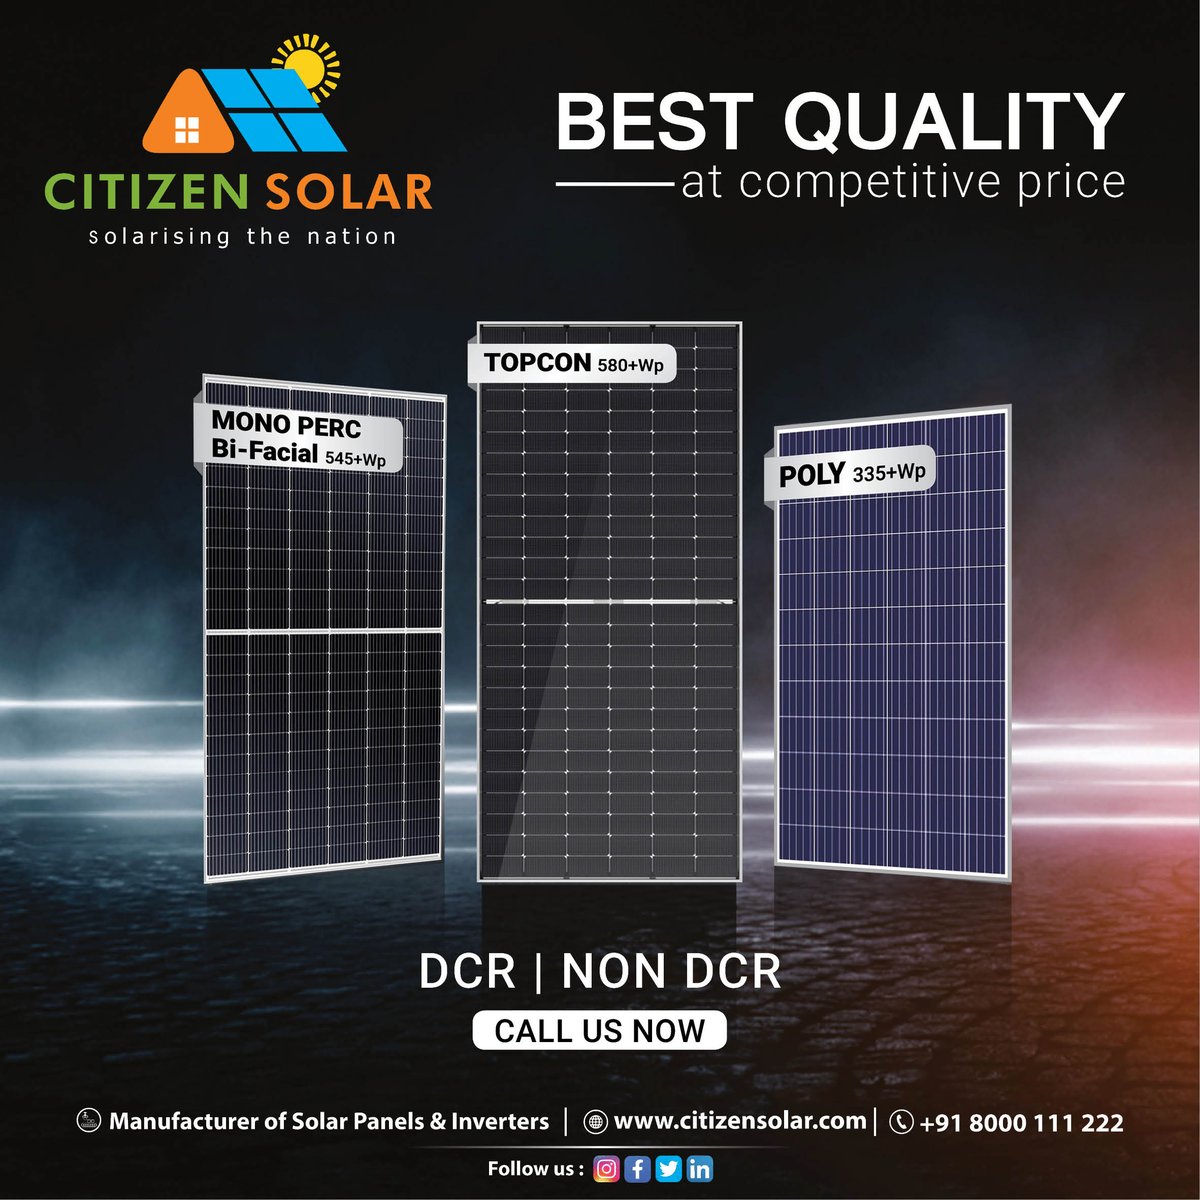 Appreciate the power of the sun this winter with a solar panel installation.
Best Quality Solar Panels & Inverters At Competitive Price.
#solarmodule #SolarEnergy  #solarsystem #monofacialsolar #solarpvsystem #solarpv #solarinstallation #topcon #DCR #NONDCR #Citizensolar #panels